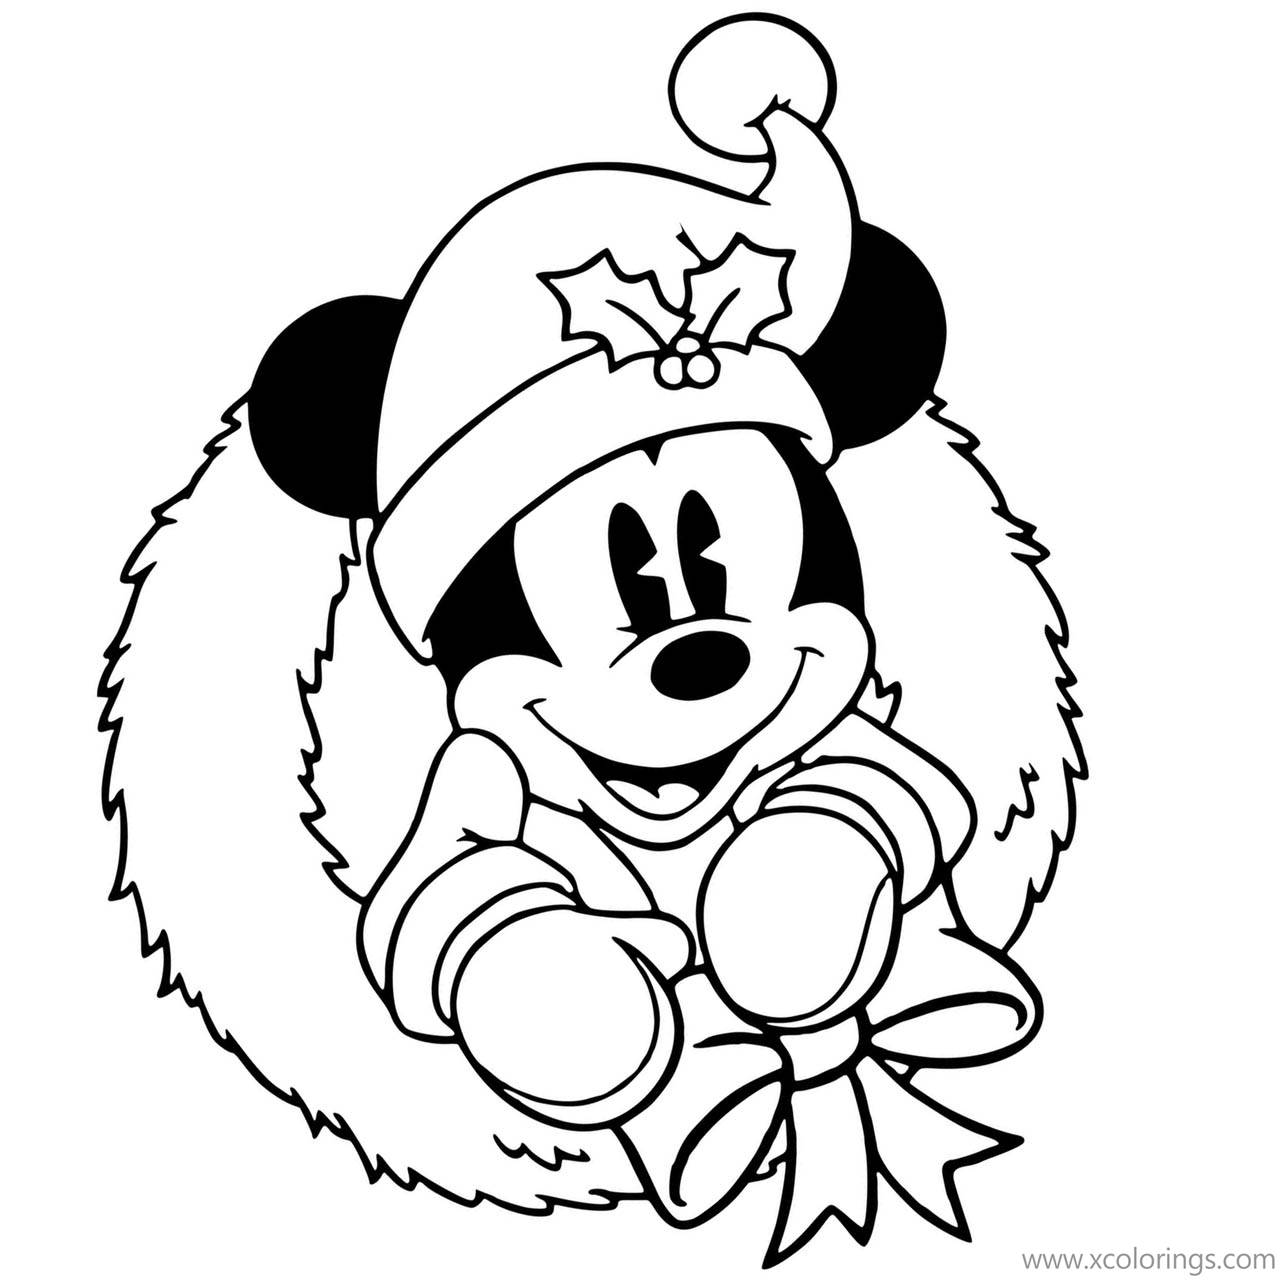 Free Mickey Mouse in Christmas Wreath Coloring Pages printable